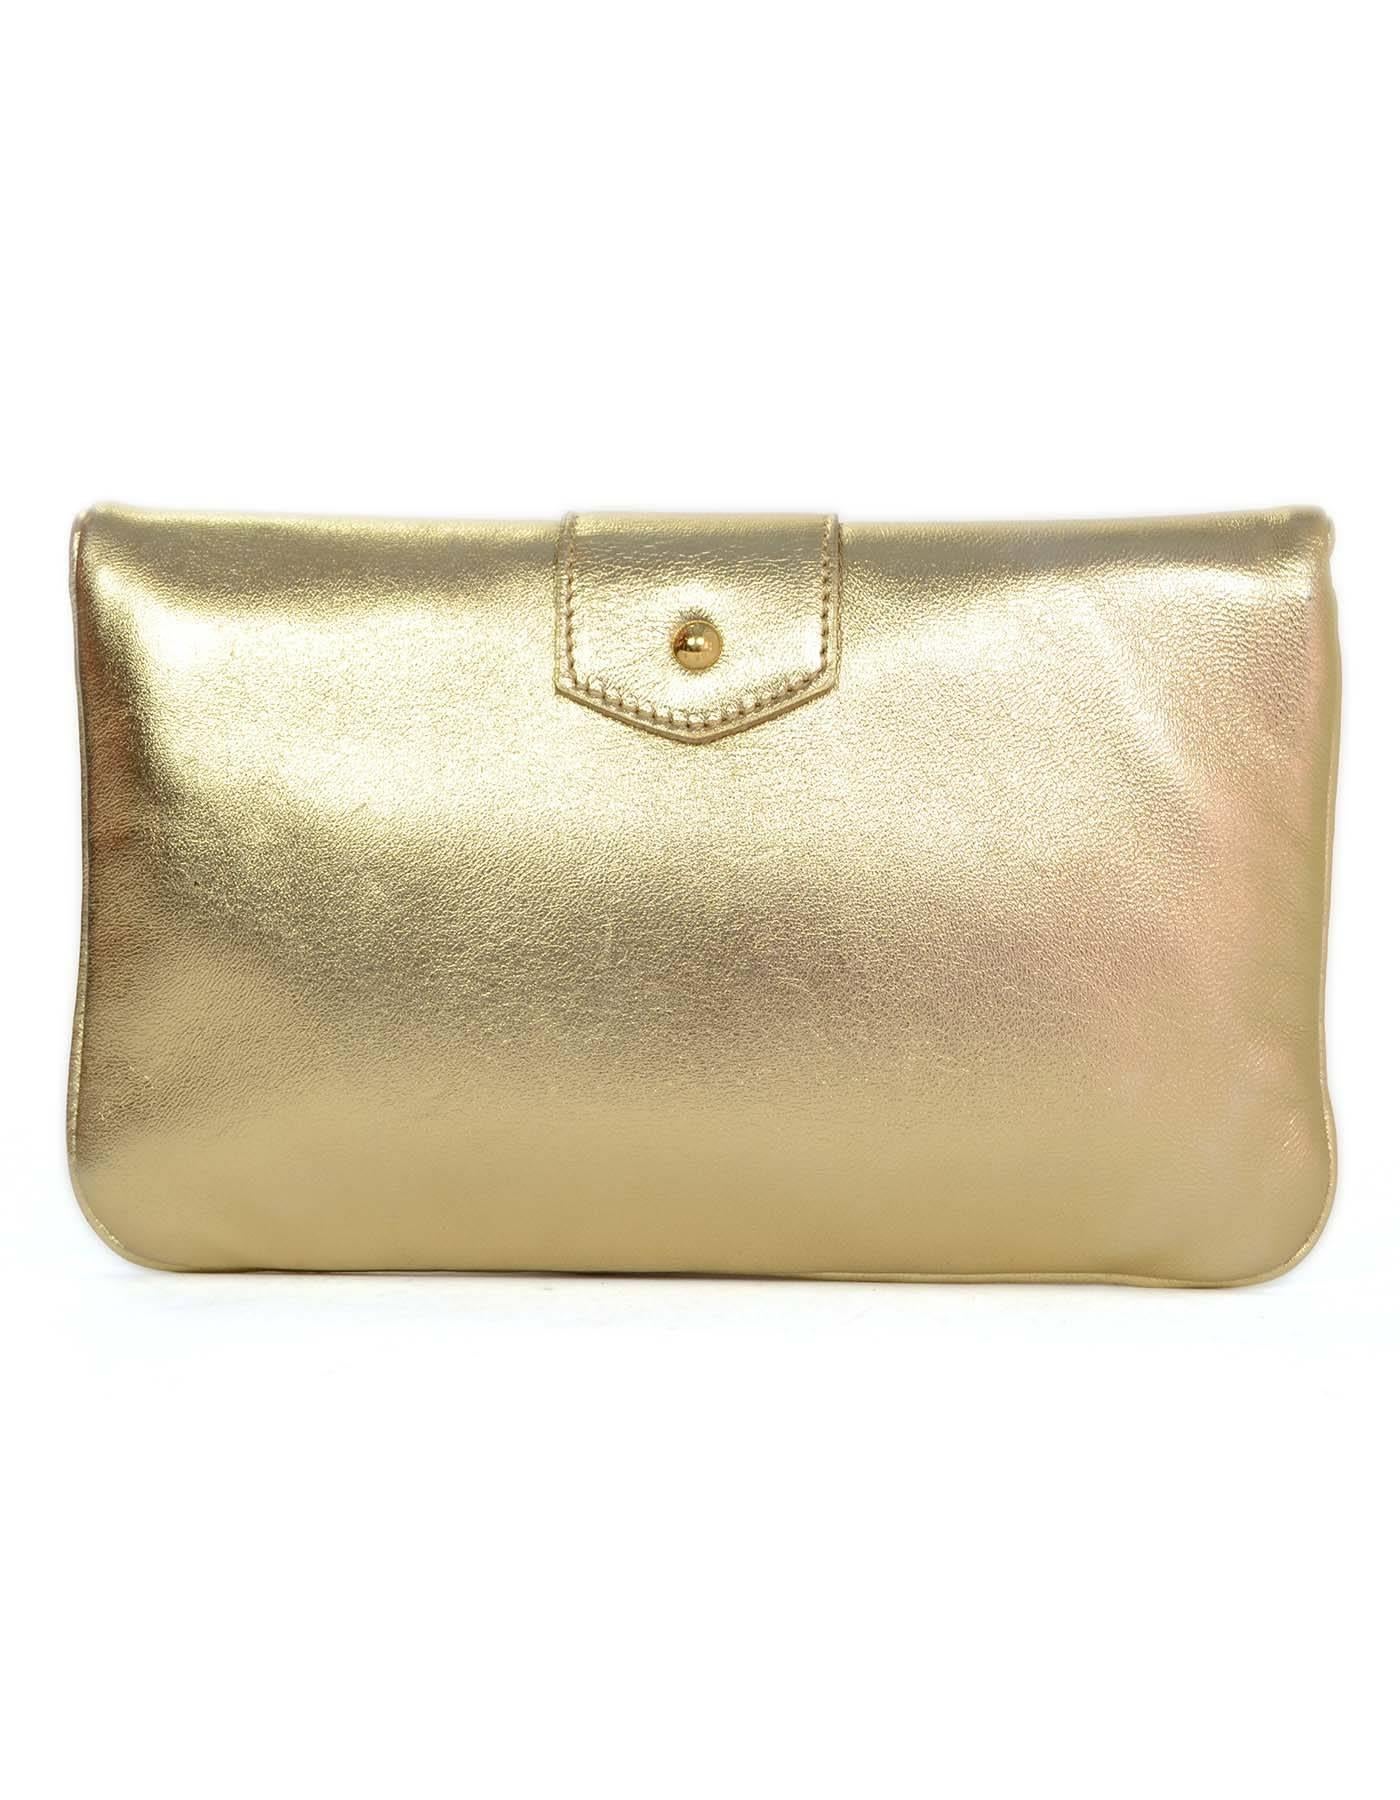 100% Authentic Louis Vuitton Gold Leather Sofia Coppola Clutch. This small, yet roomy clutch was created and named after director Sophia Coppola.

    Made in: Italy
    Year of Production: 2009
    Color: Gold
    Hardware: Goldtone
   